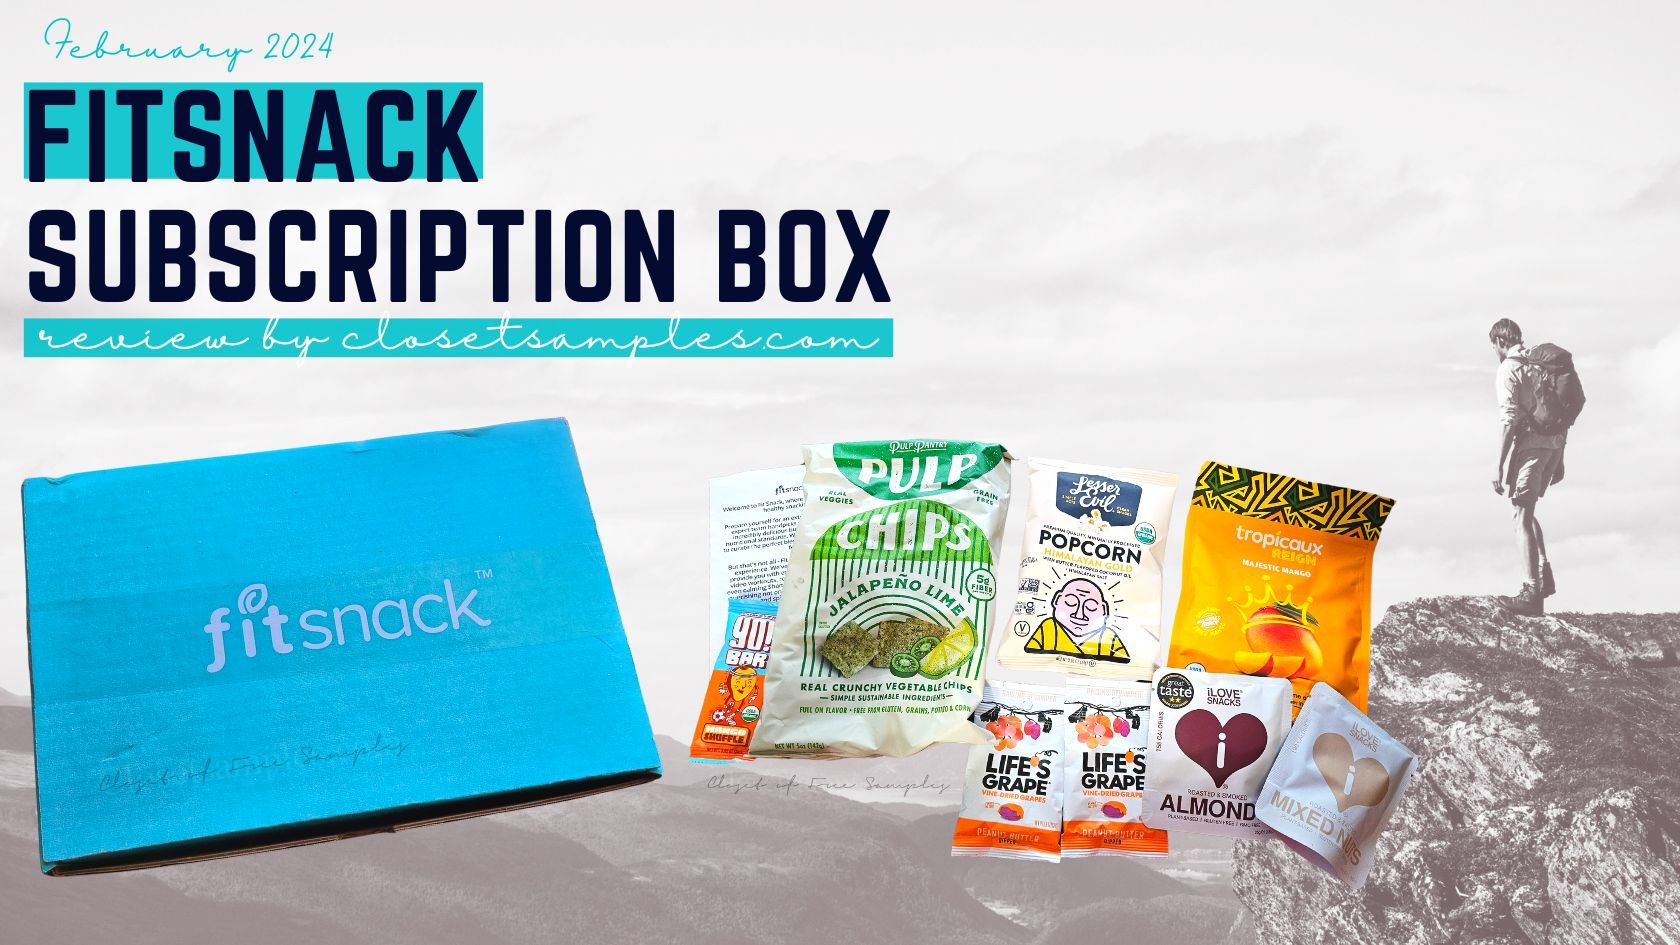 FitSnack Subscription Box February 2024 Review closetsamples